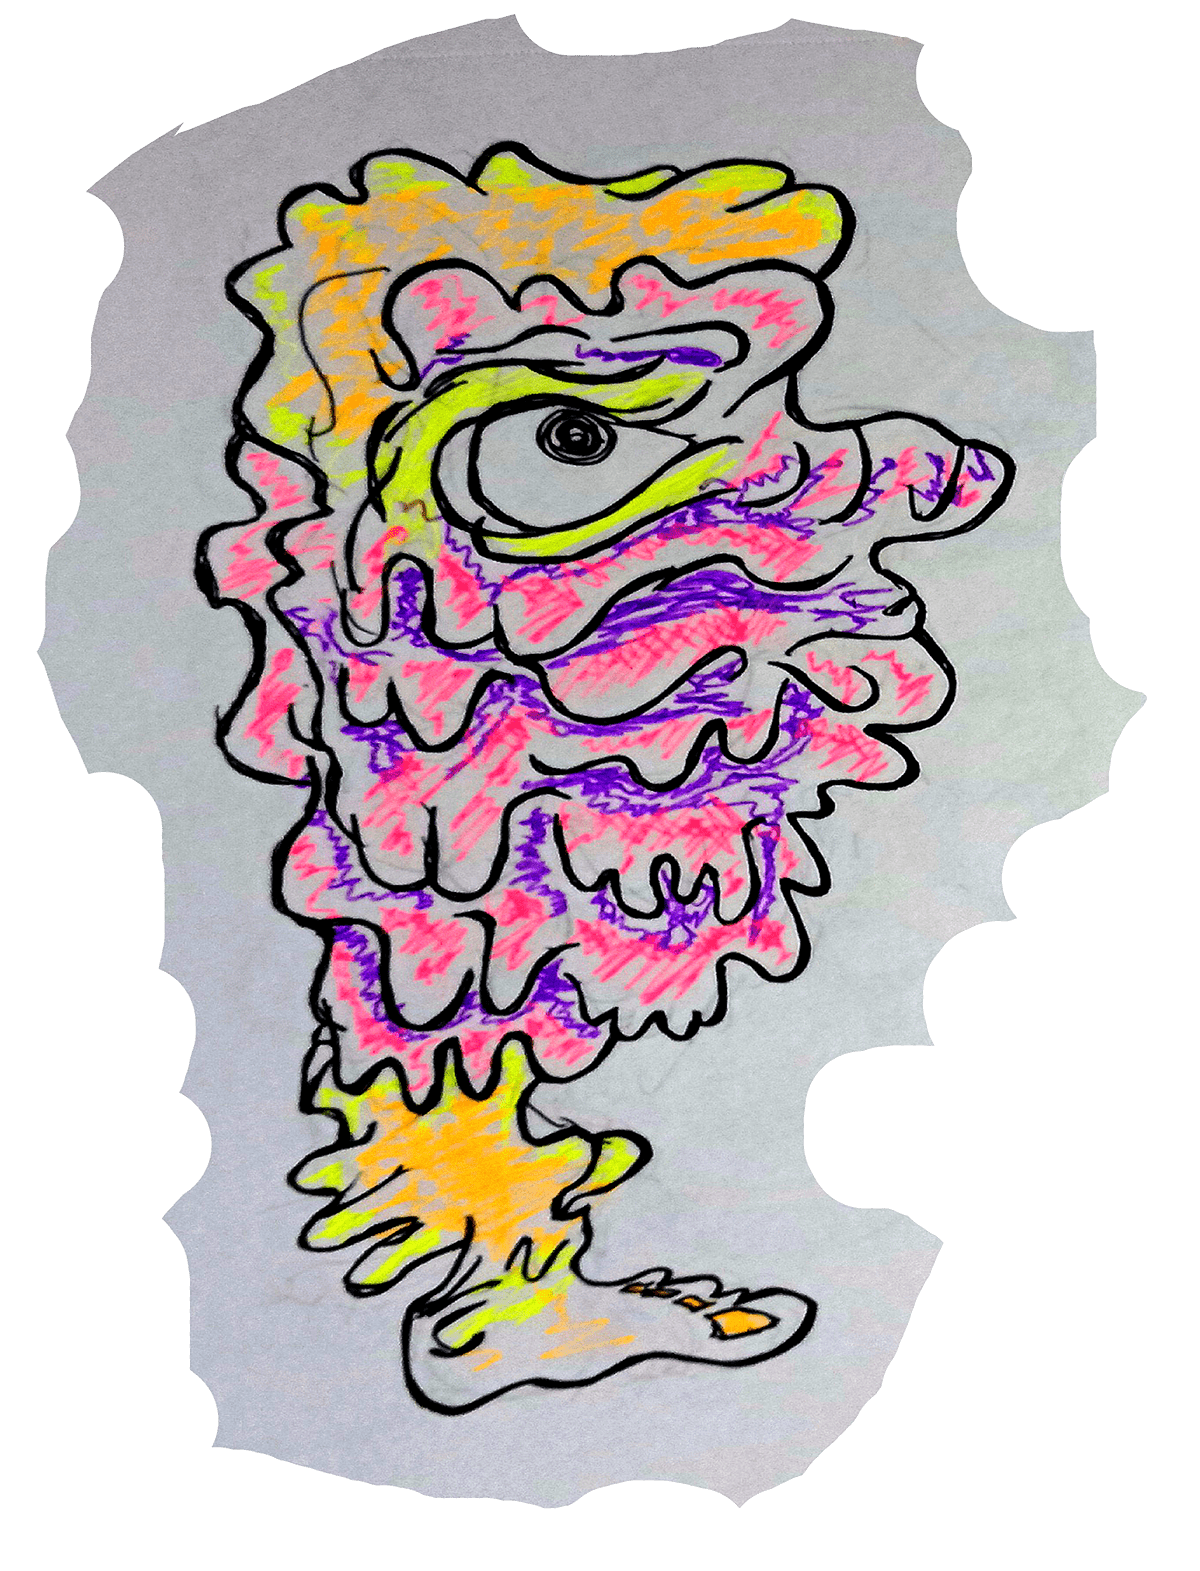 Character design  doodles freaks lowbrow monsters psychedelic surreal surrealism trippy trippy monster